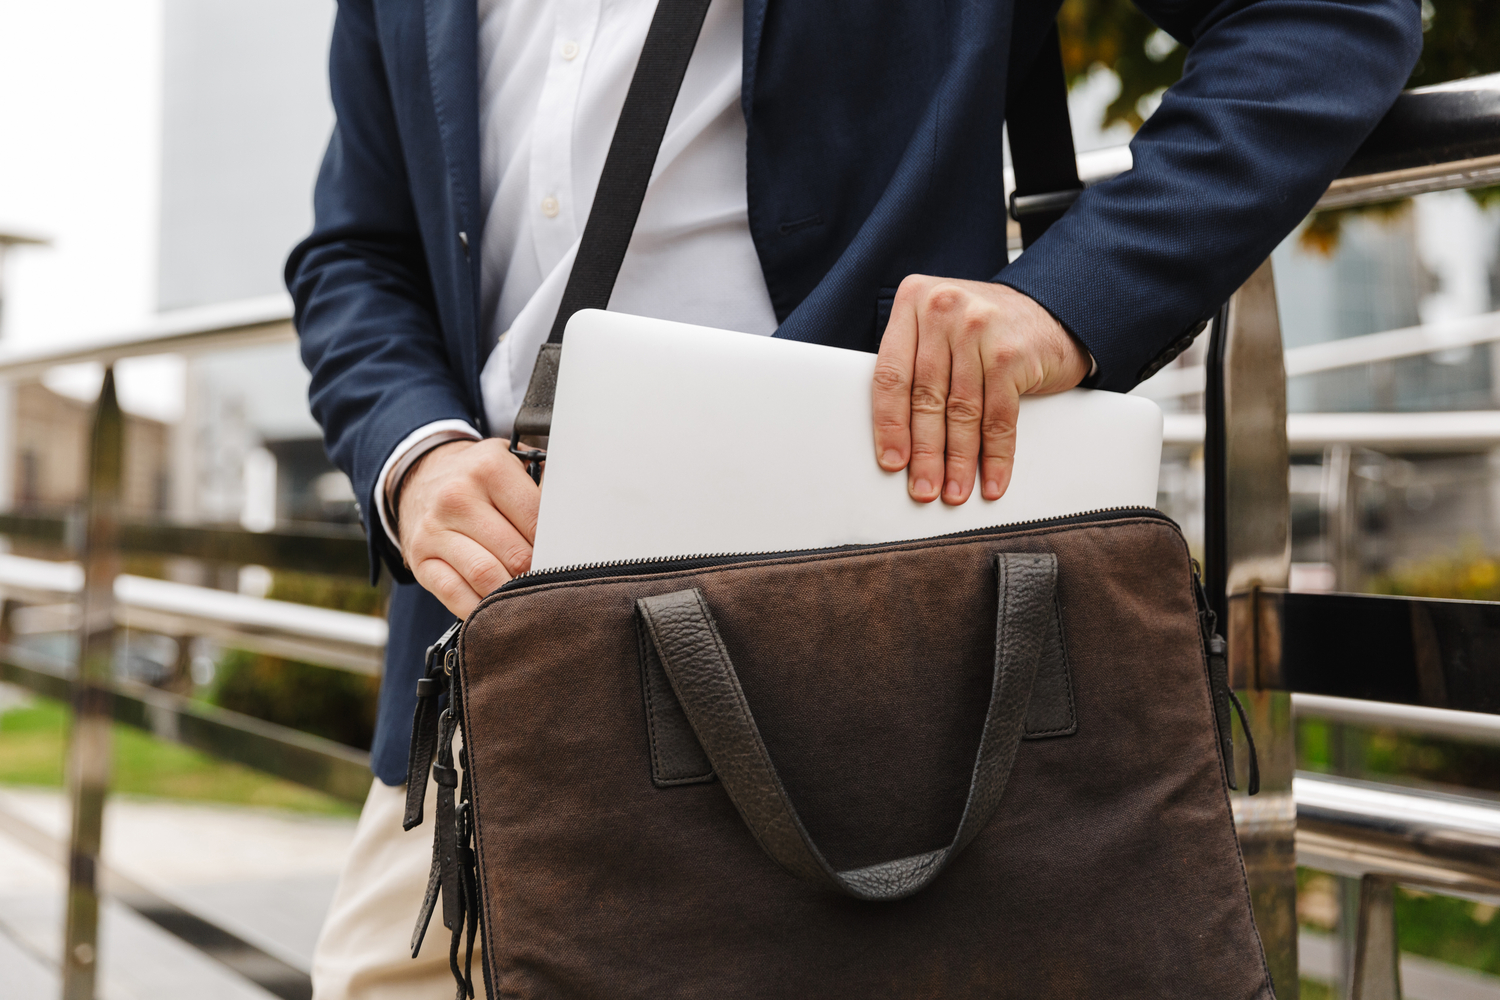 Best Brand for Laptop Bags